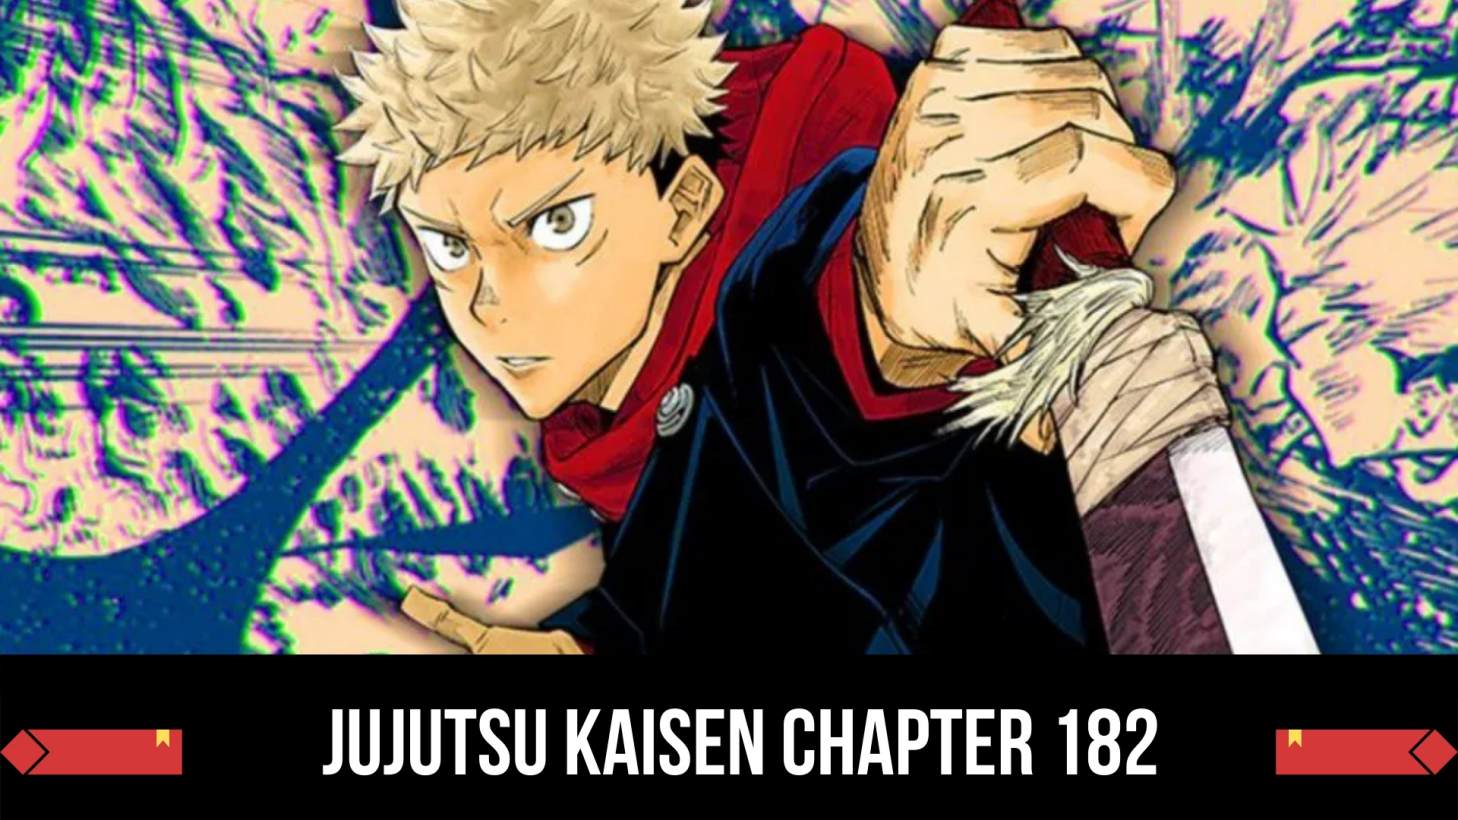 Jujutsu Kaisen Chapter 182 Release Date, Raw Scans, Manga Spoilers, Leaks and Latest Updates